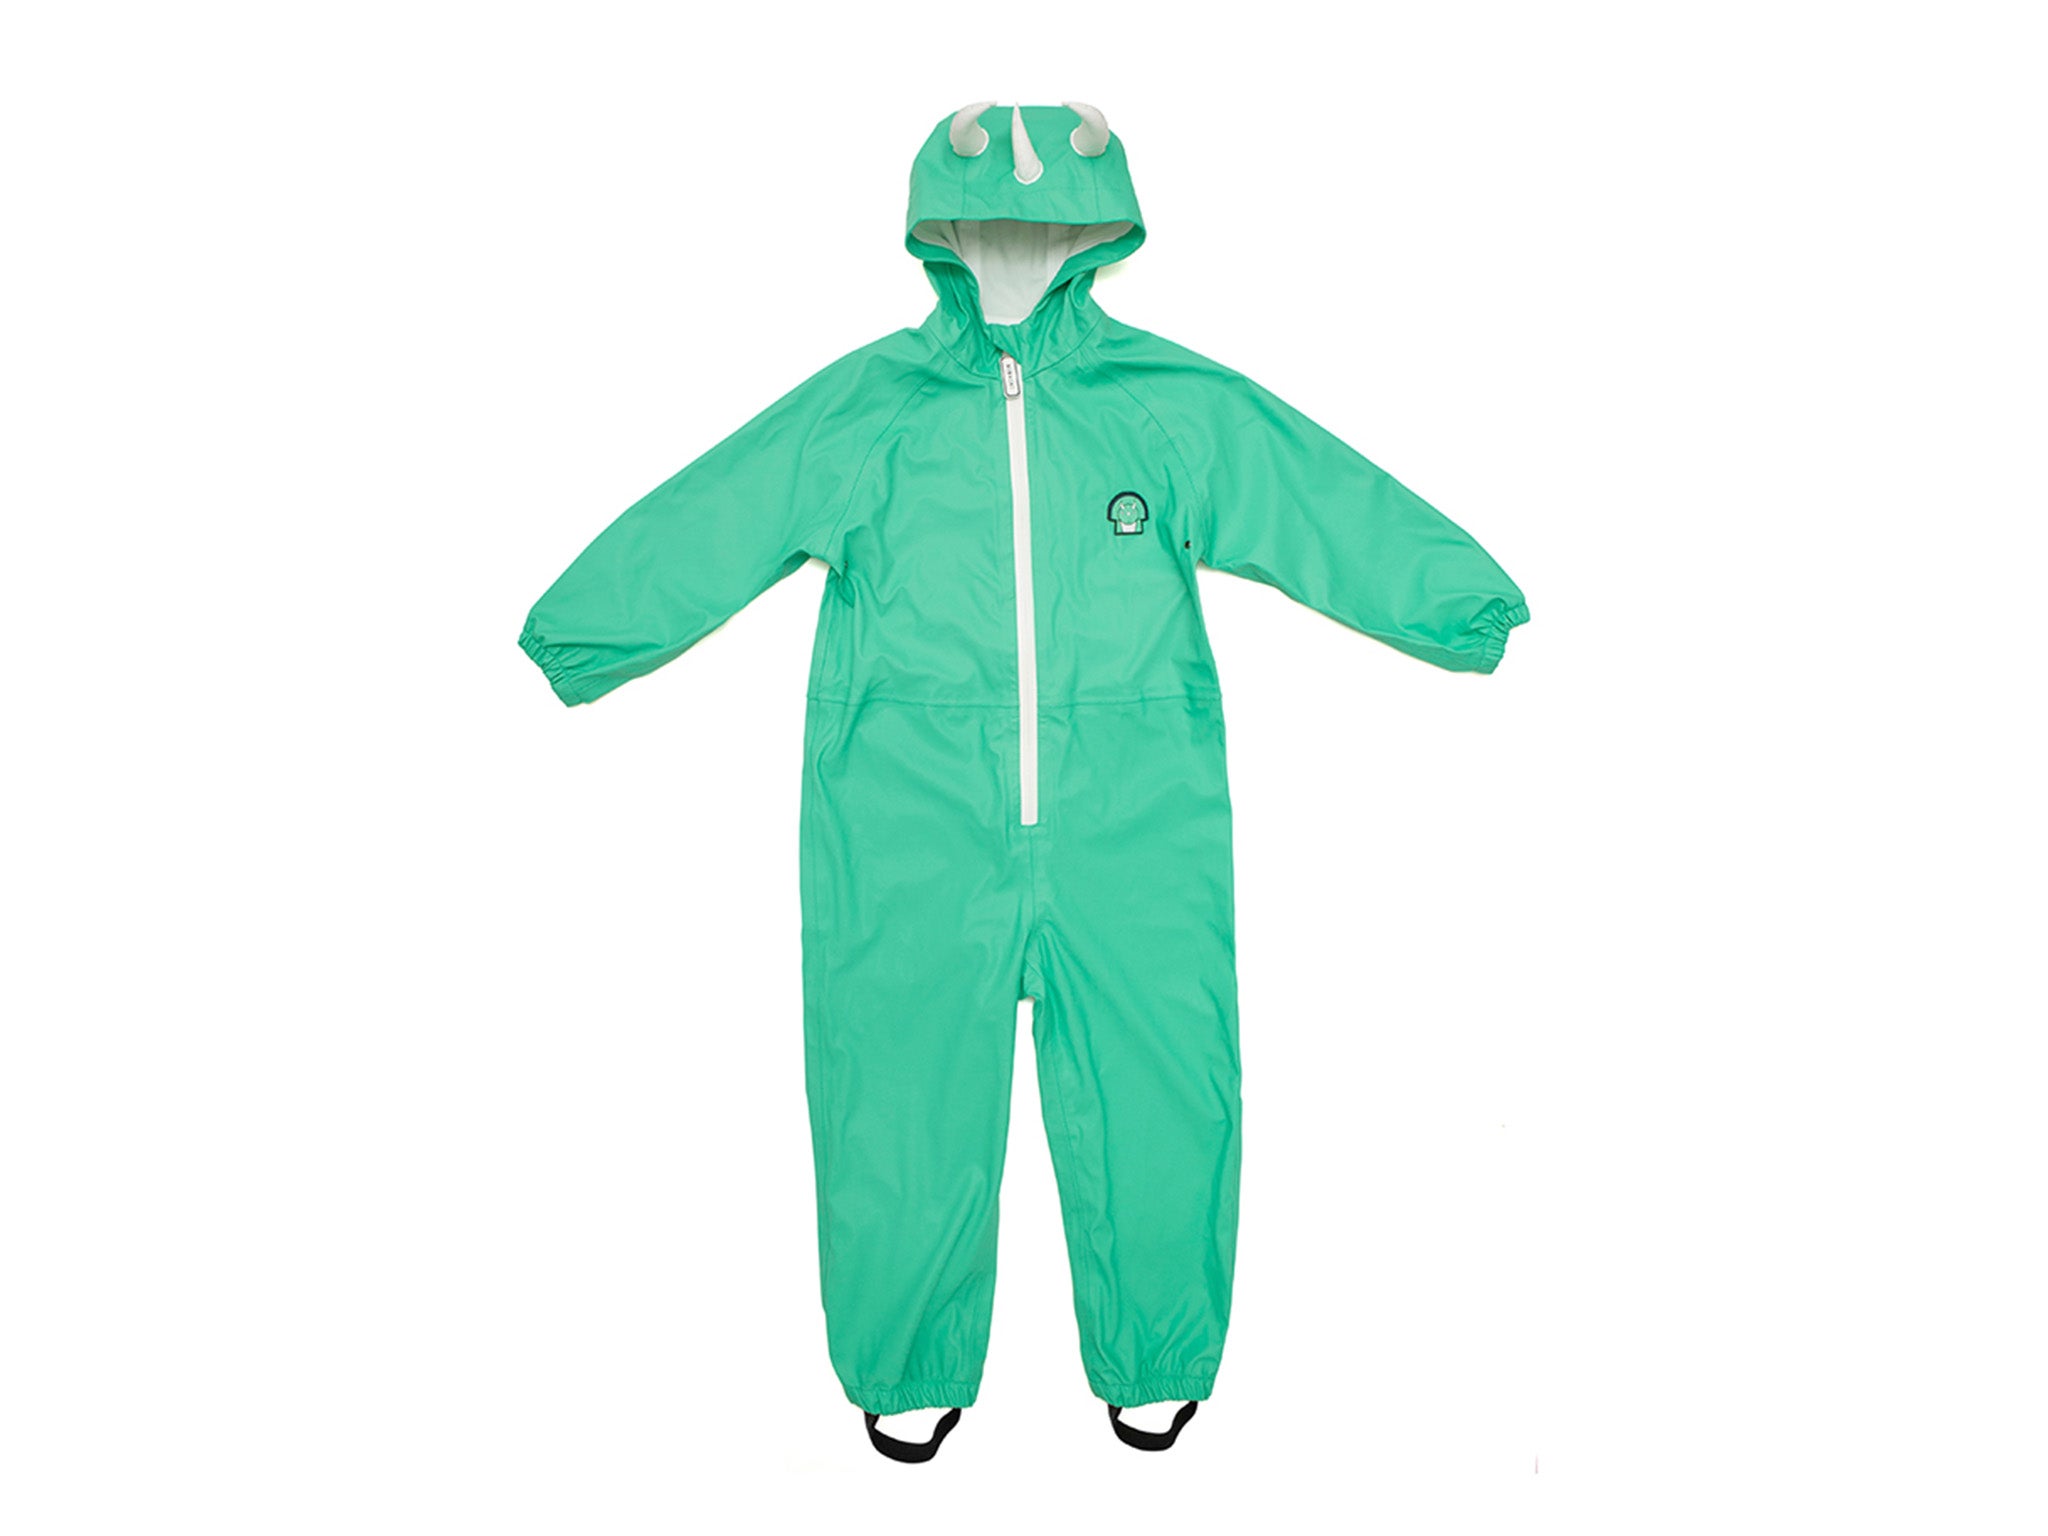 Boys Girls All in One Waterproof Suit Raincoat with Reflective Strip CAMLAKEE Childrens Puddle Suits 